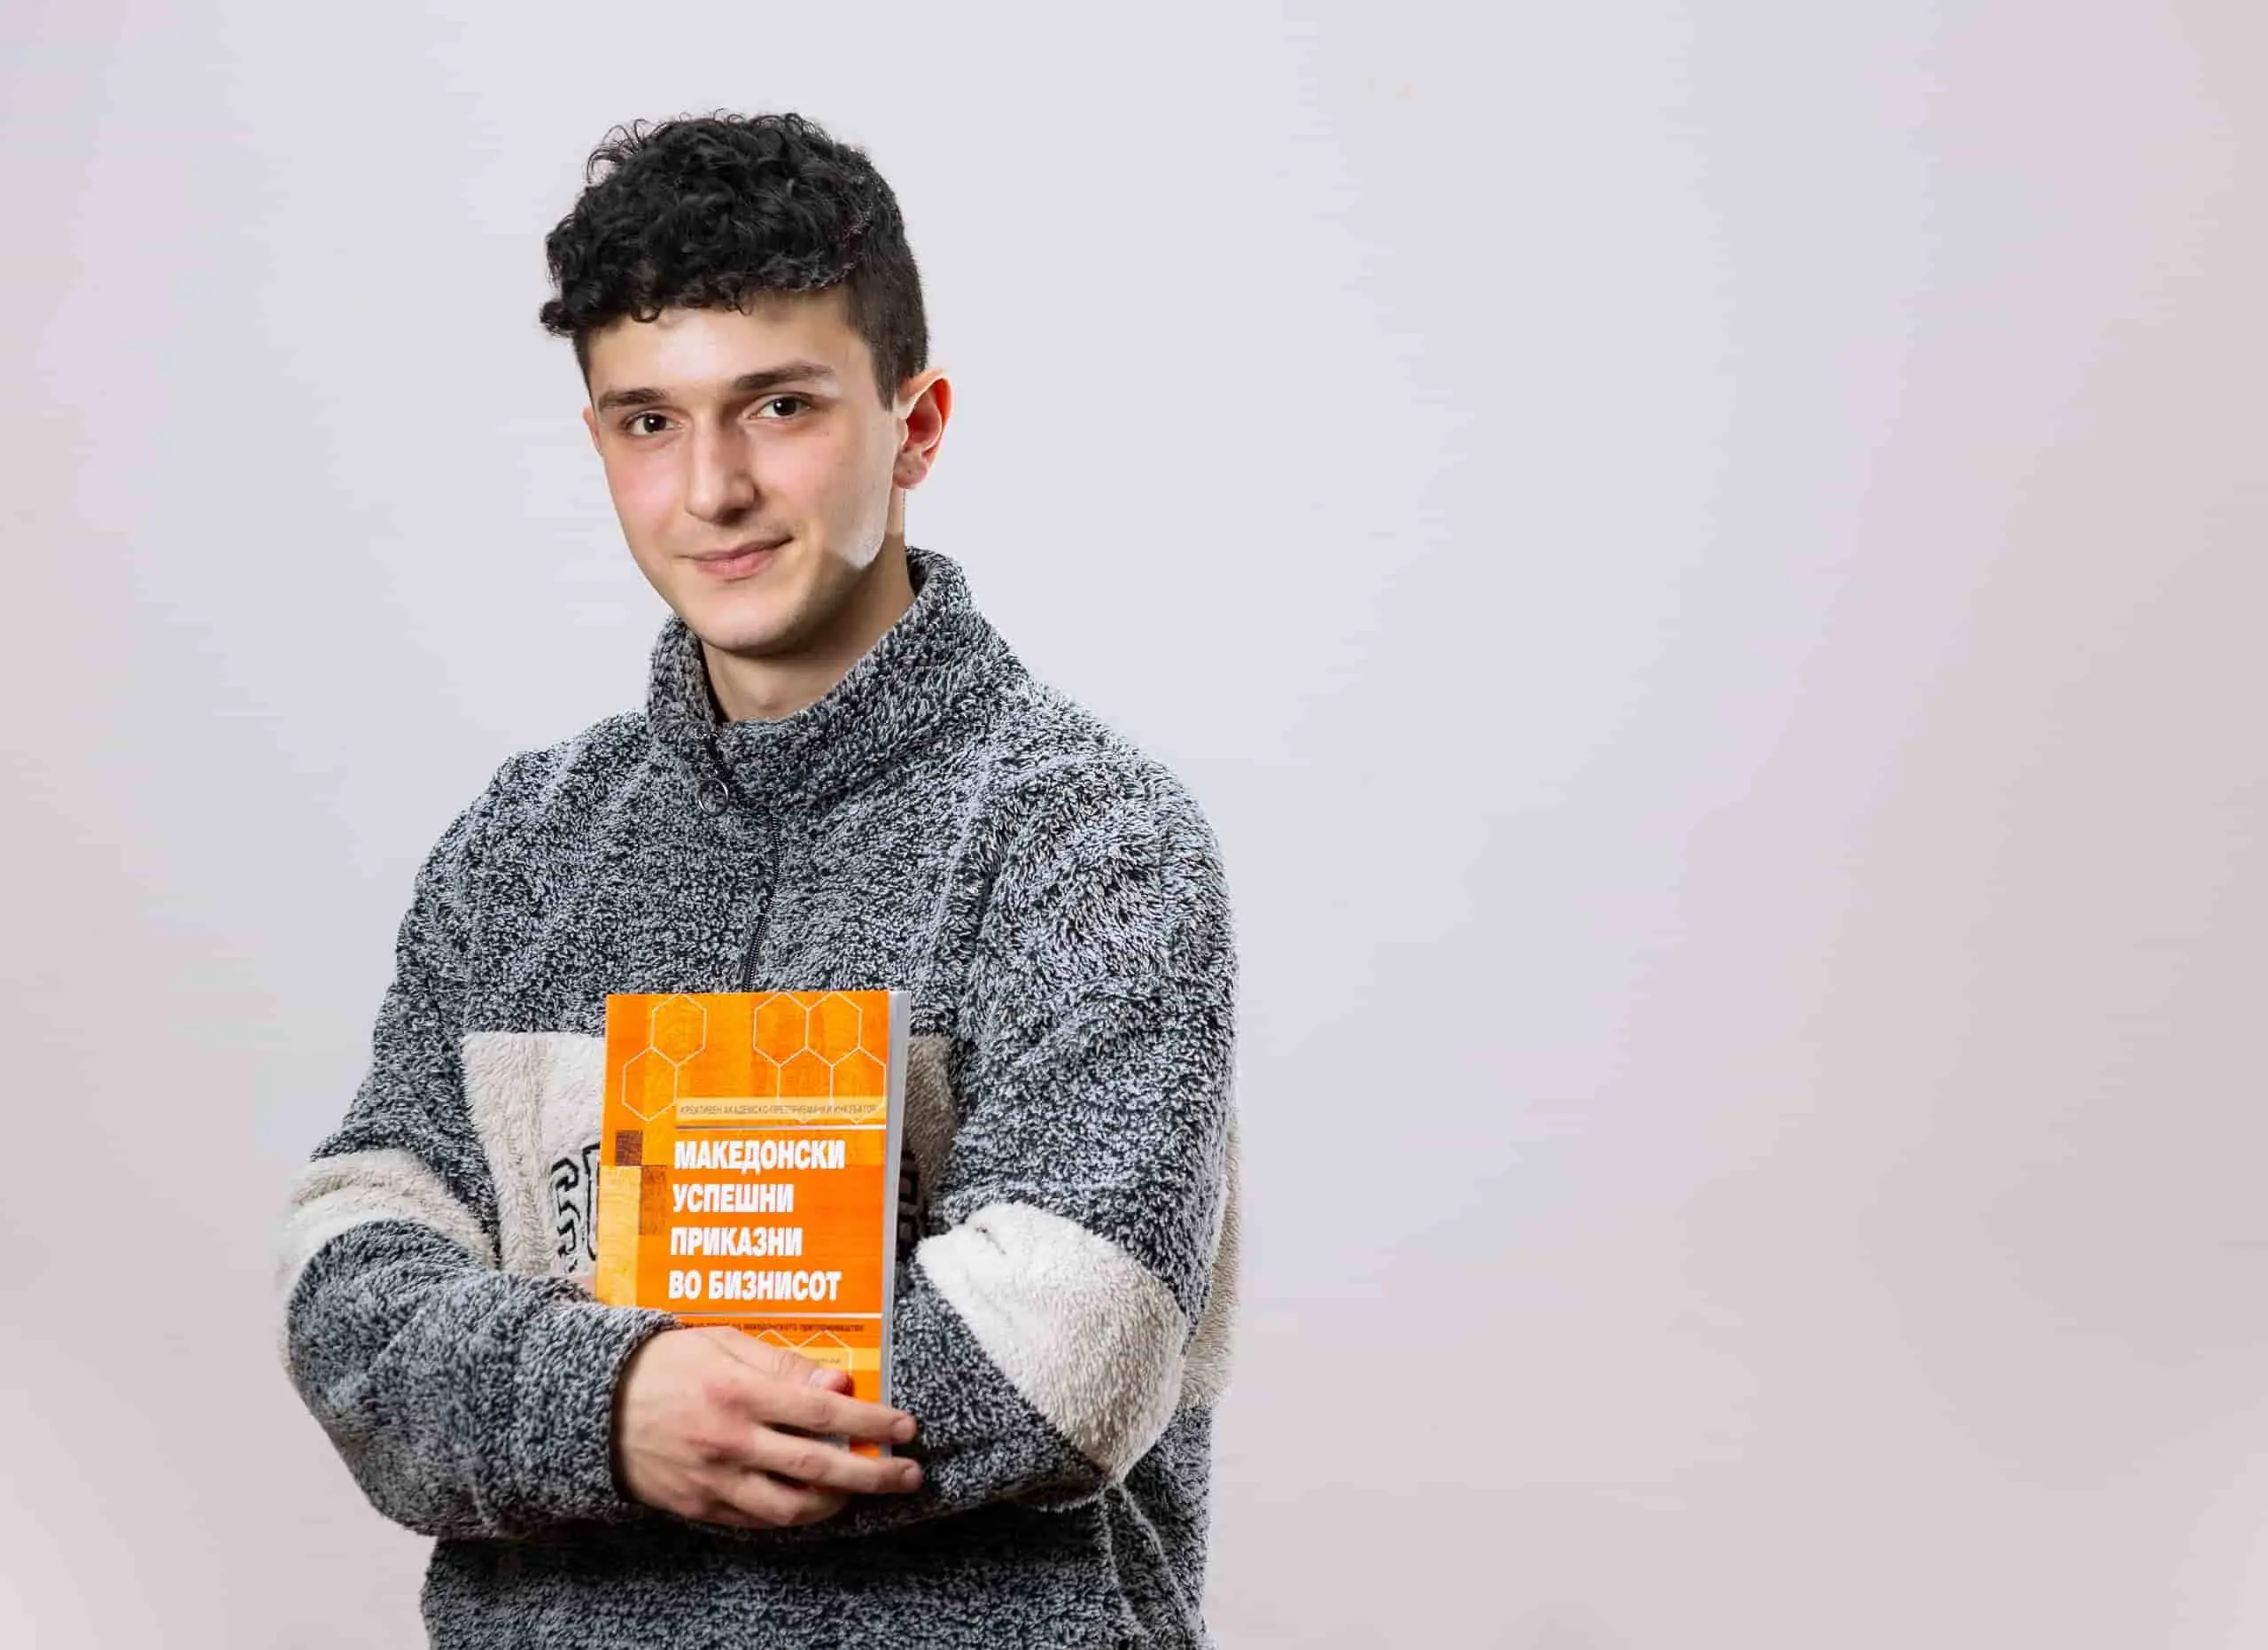 Young Man Holding a Textbook.